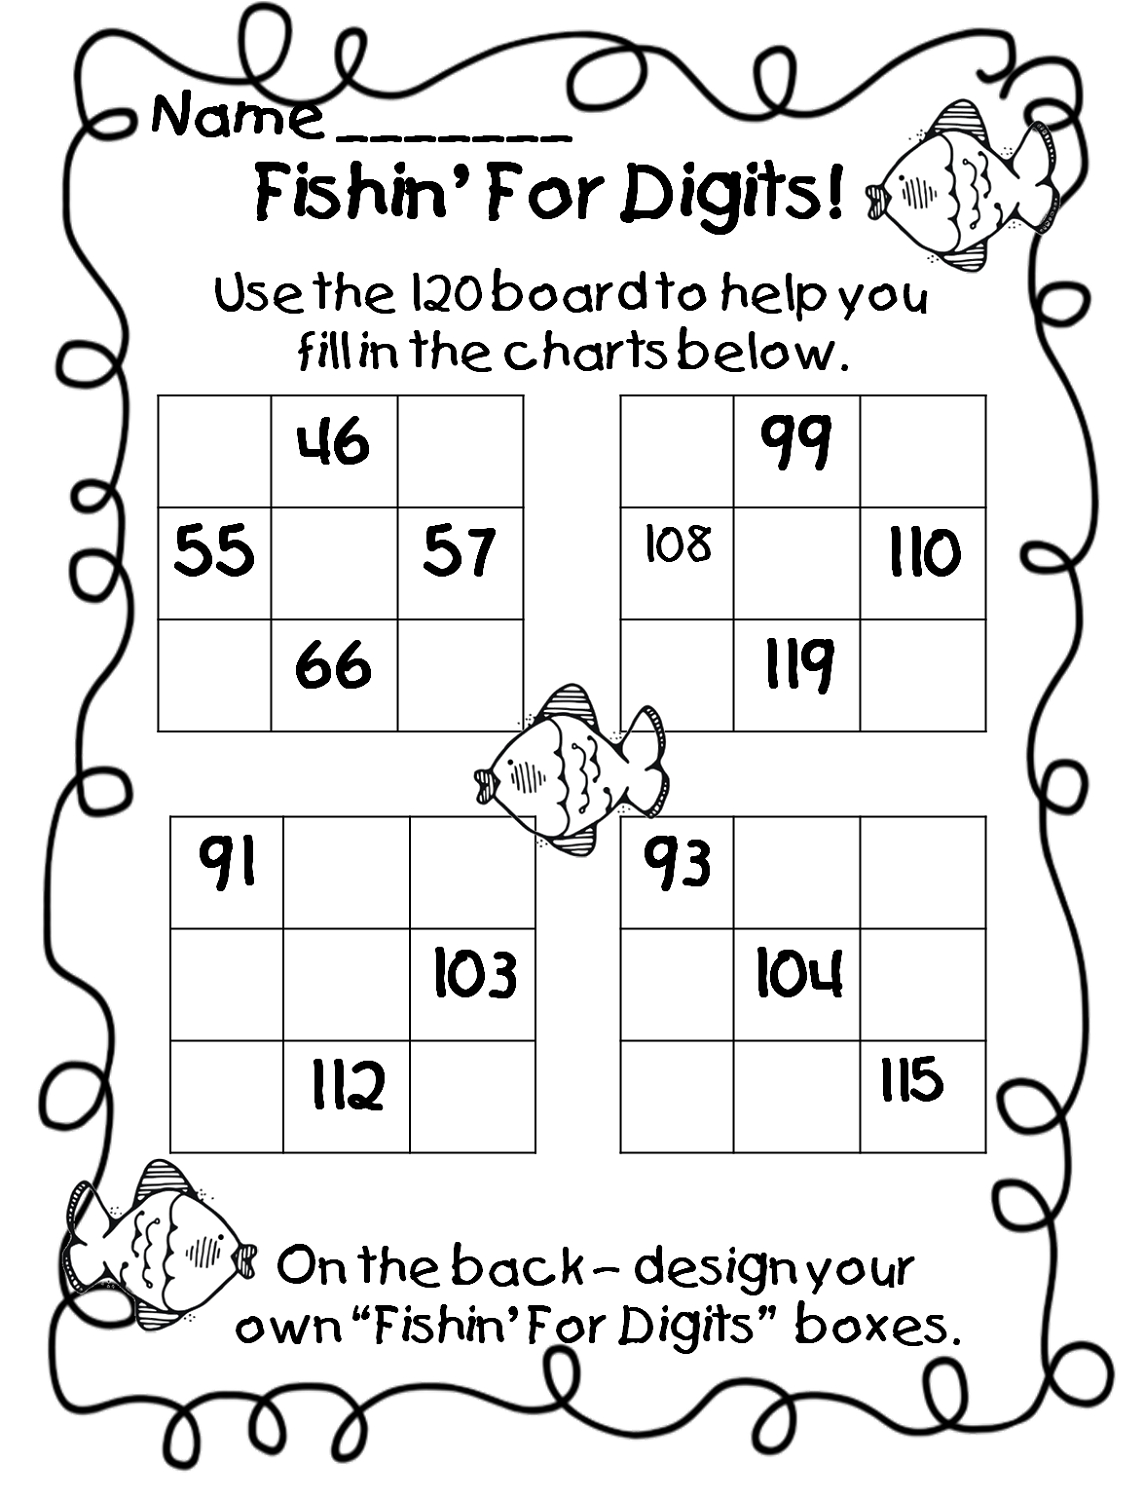 Math Puzzles Printable For Learning | Activity Shelter - Printable Puzzles For Kindergarten